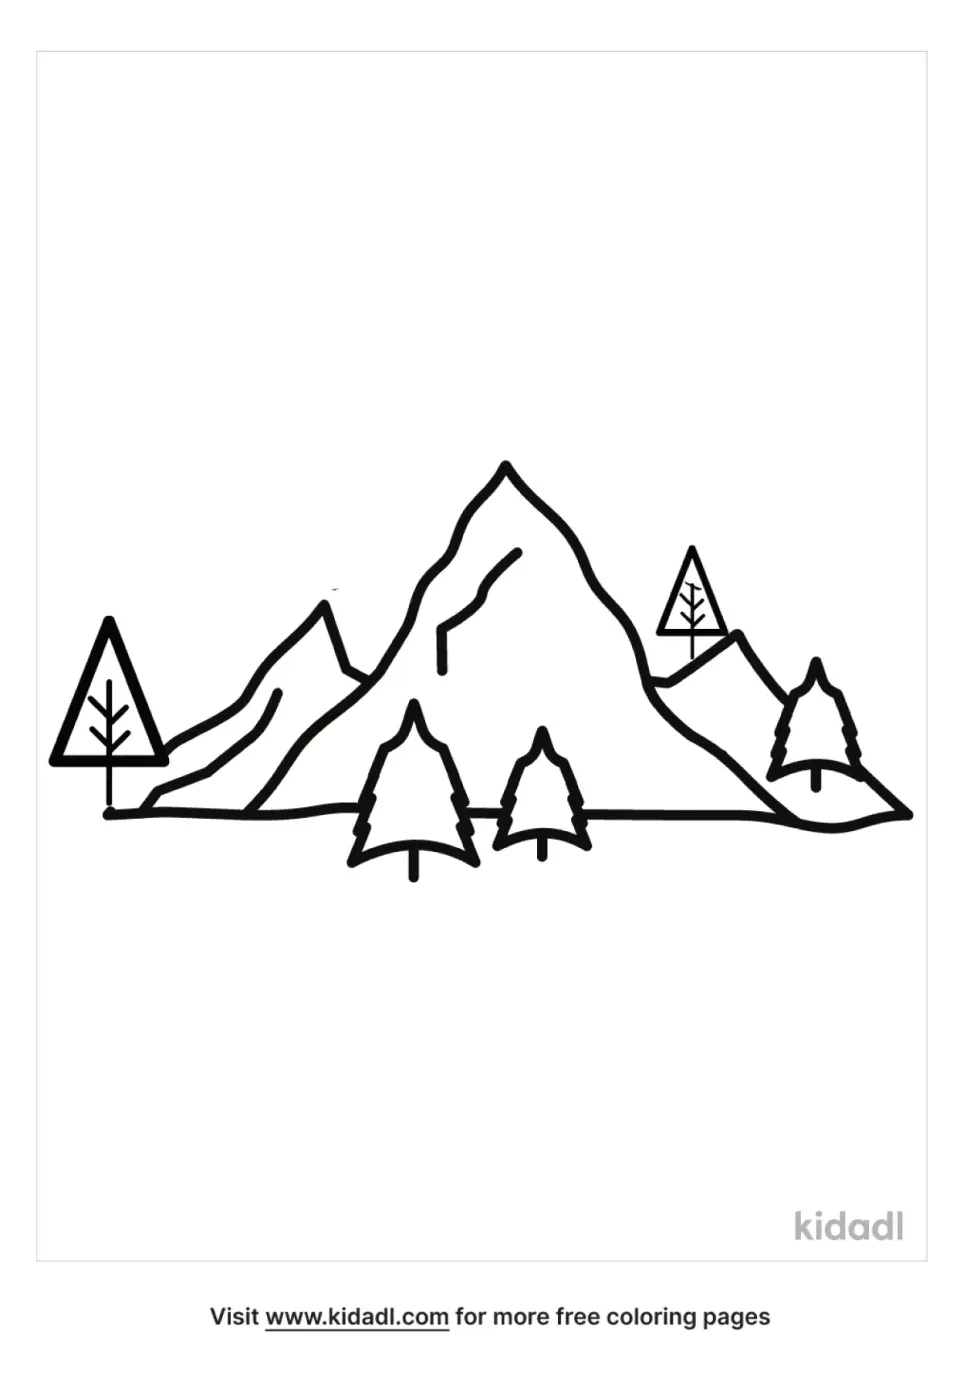 Mars Hill Coloring Page